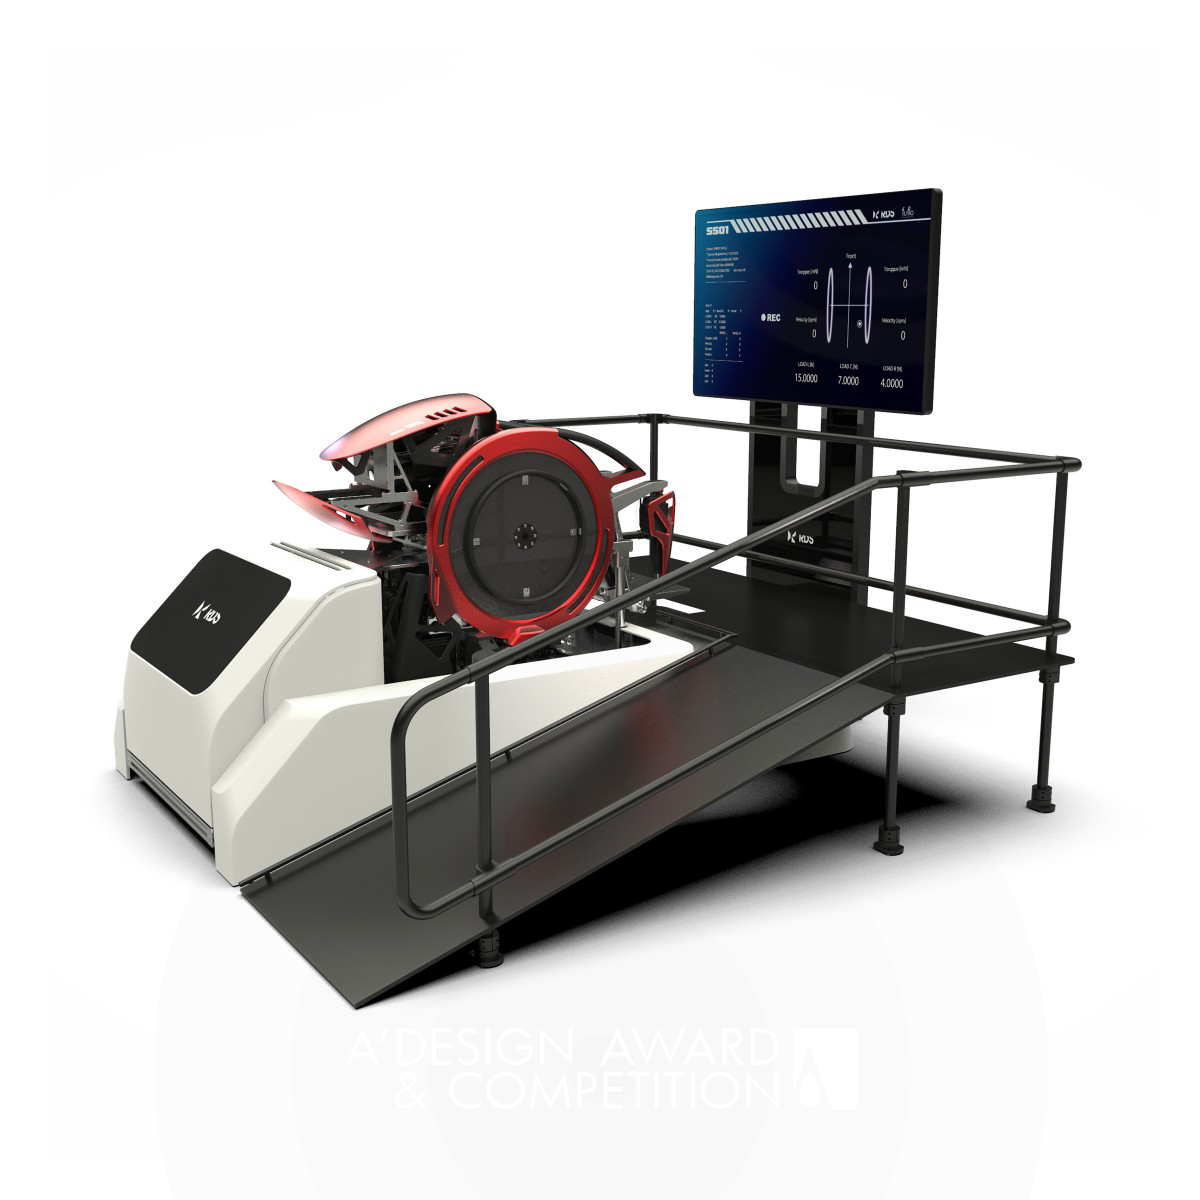 SS01 Wheelchair Simulation System